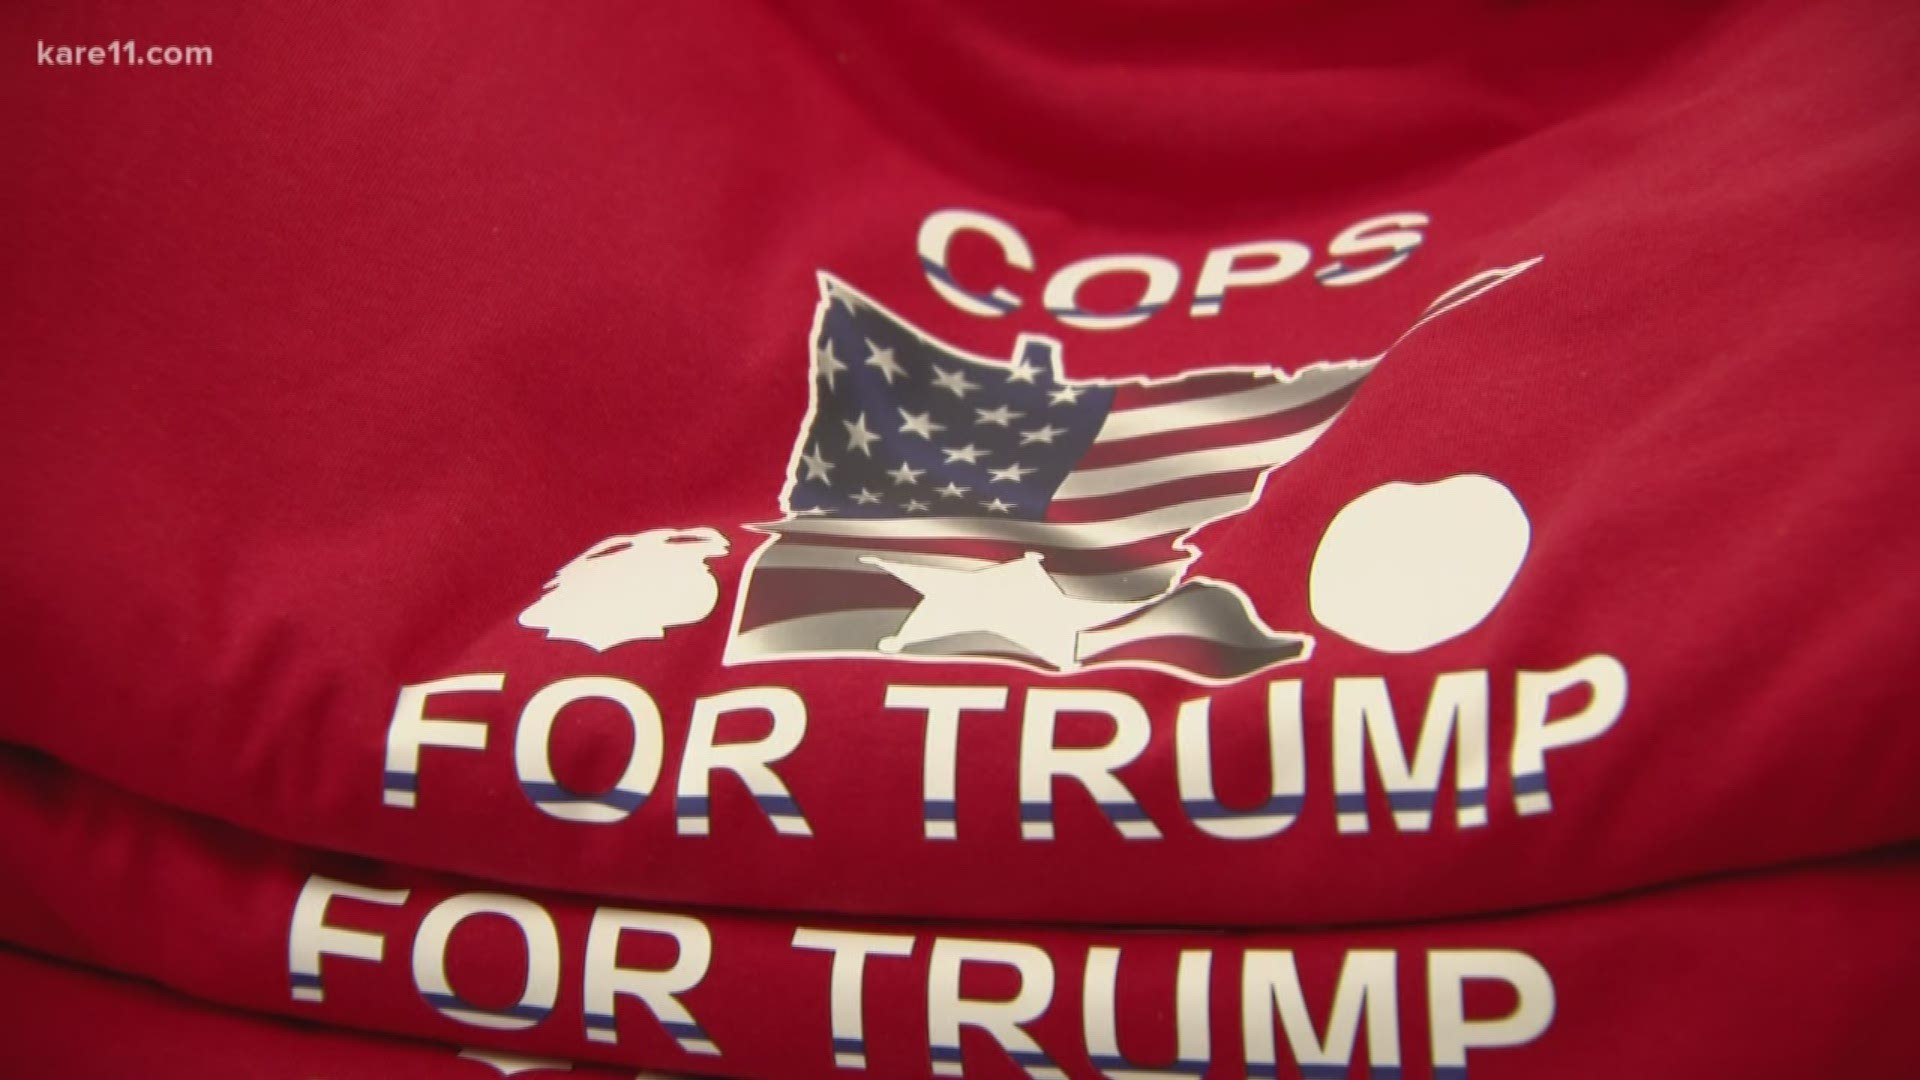 The "Cops for Trump" t-shirts created by the Minneapolis Police Federation are selling quickly. Off-duty officers were told not to wear uniforms to Trump's rally